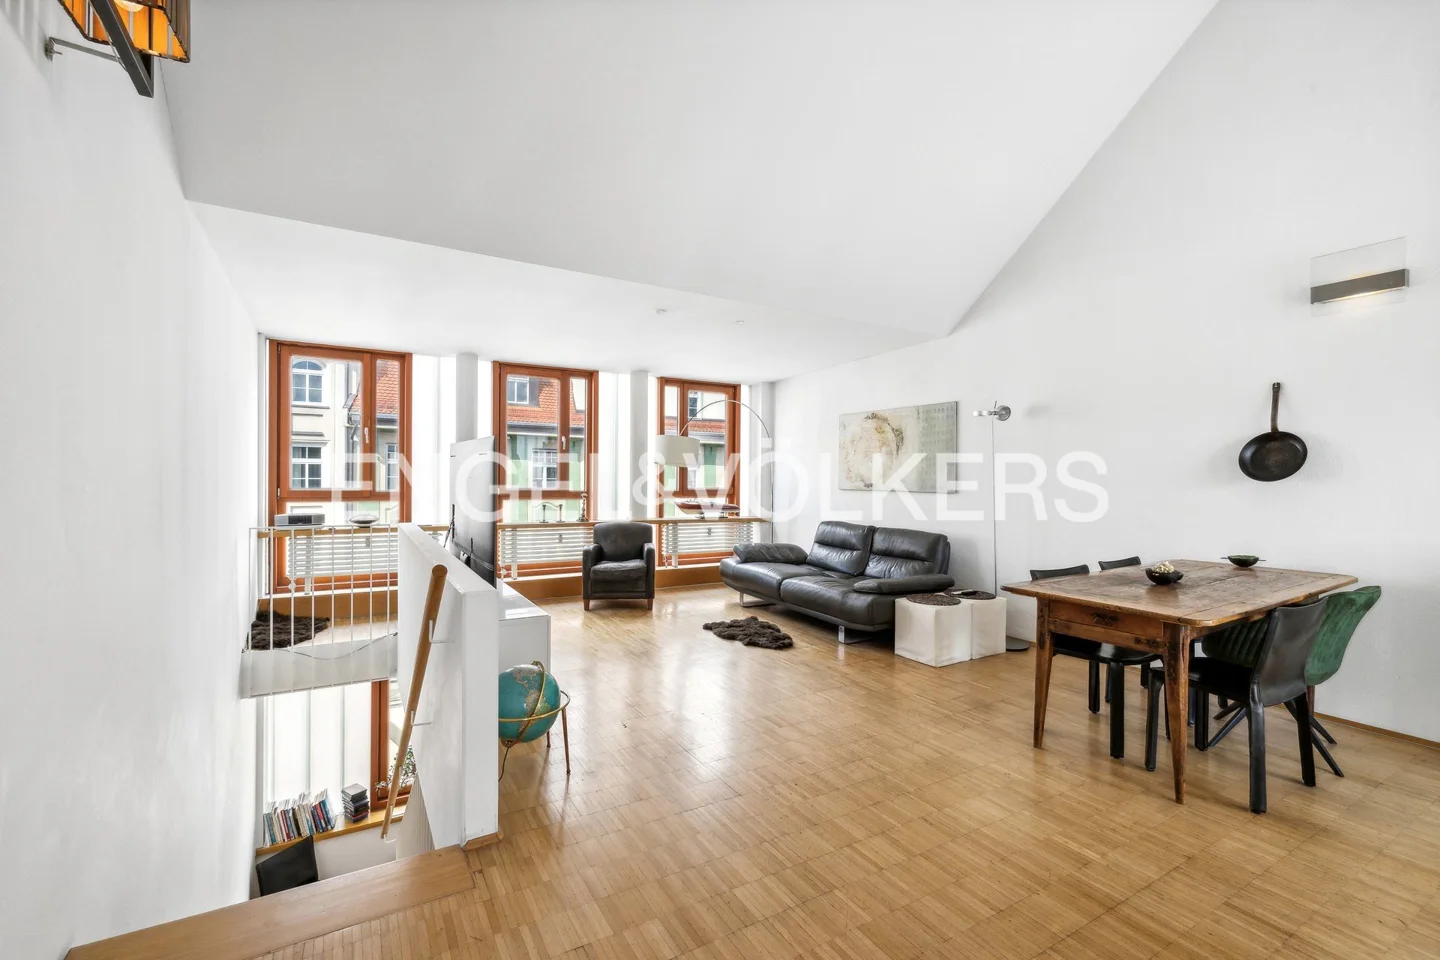 Maisonette apartment in a prime location: modern living in the heart of Schwabing